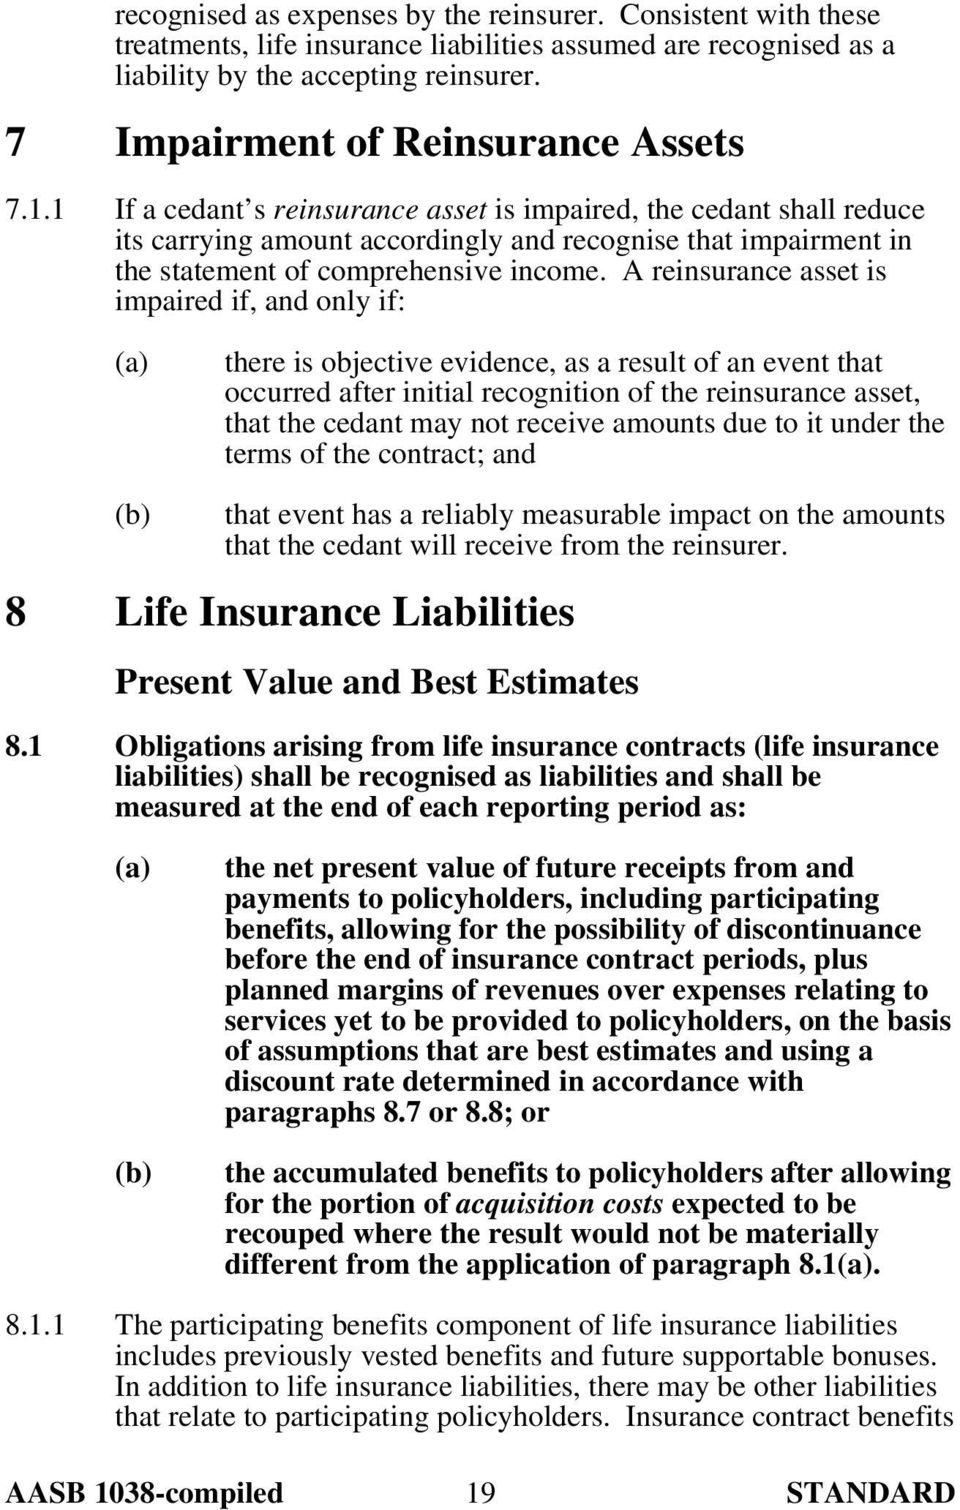 1 If a cedant s reinsurance asset is impaired, the cedant shall reduce its carrying amount accordingly and recognise that impairment in the statement of comprehensive income.